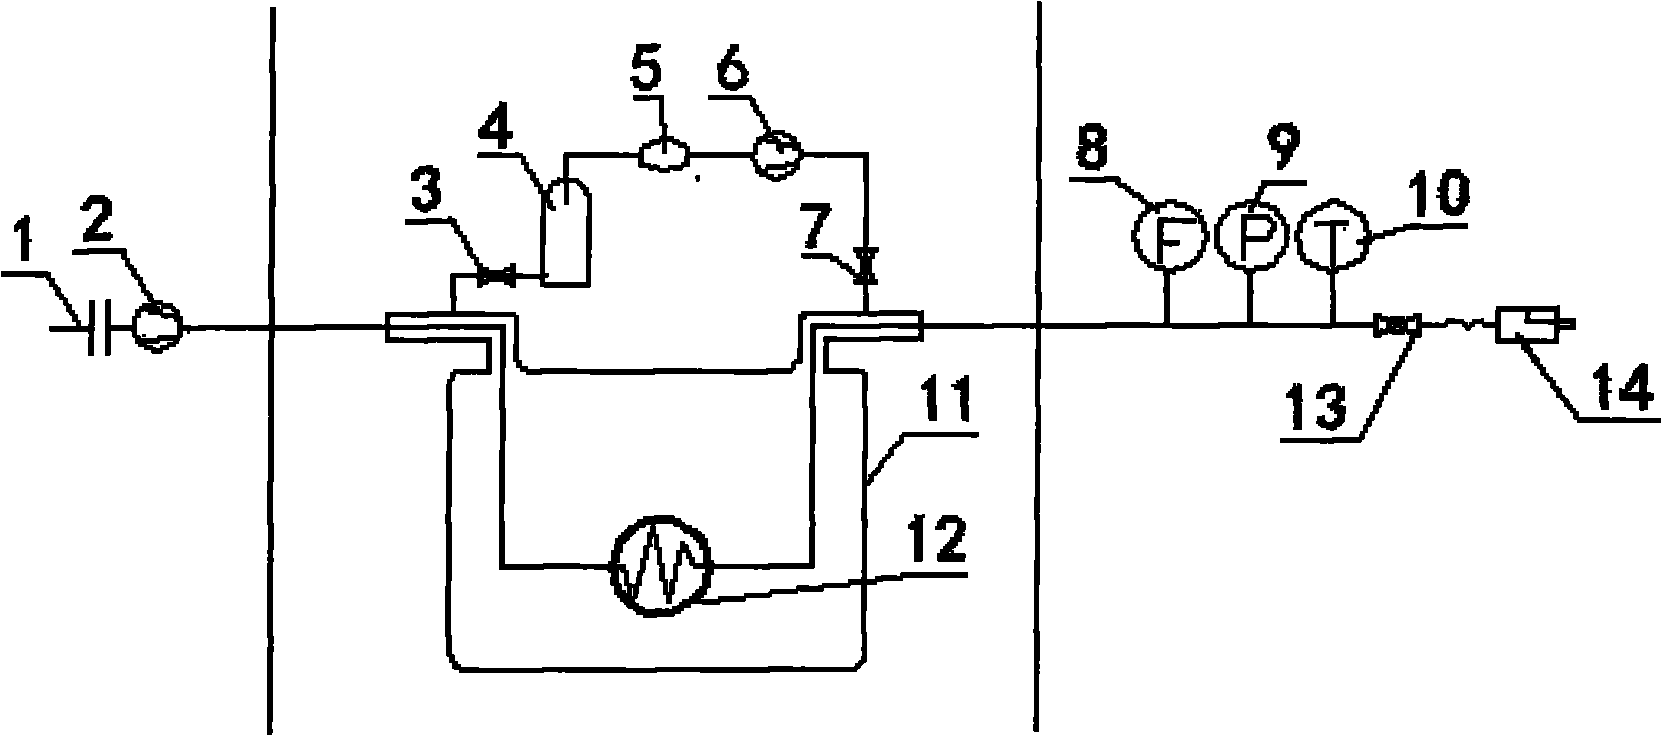 Cooling and filling method for hydrogen fuel used for vehicle